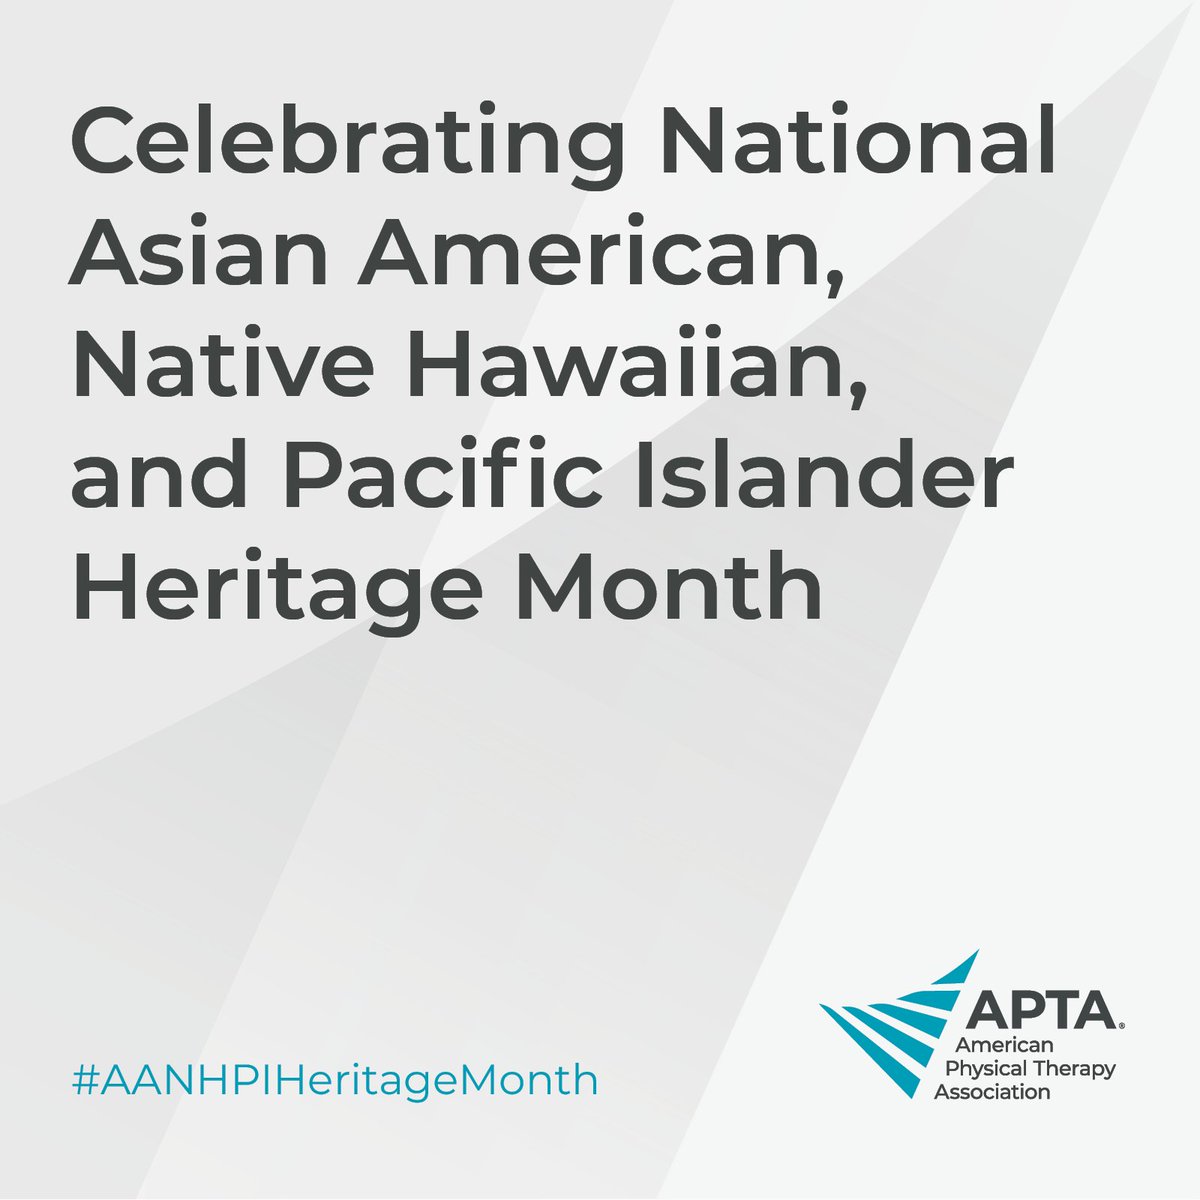 This May, we celebrate National Asian American, Native Hawaiian, and Pacific Islander Heritage Month. APTA honors the PTs and PTAs from AANHPI communities who enrich our profession with their diverse backgrounds, knowledge, and expertise. #AANHPIHeritageMonth #AANHPIHM